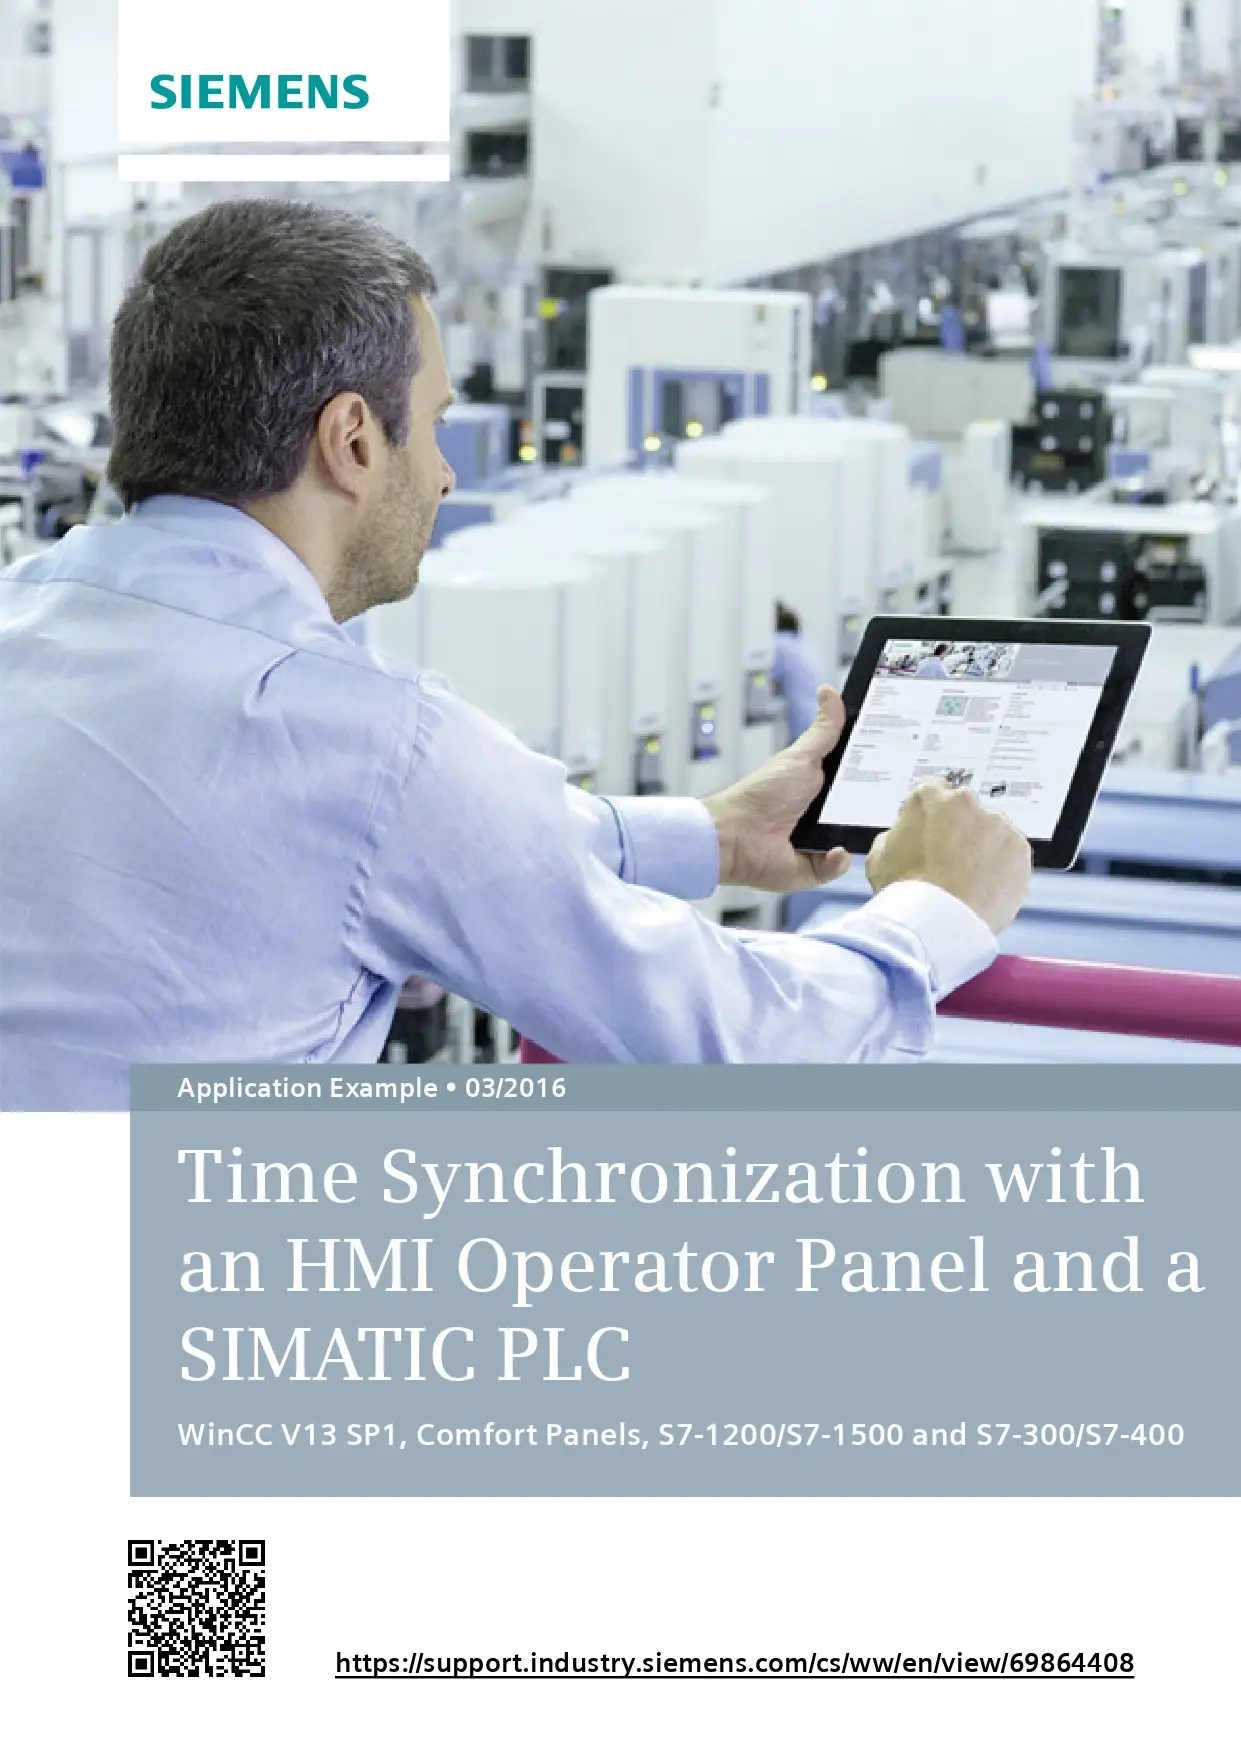 Time Synchronization with an HMI Operator Panel and a SIMATIC PLC